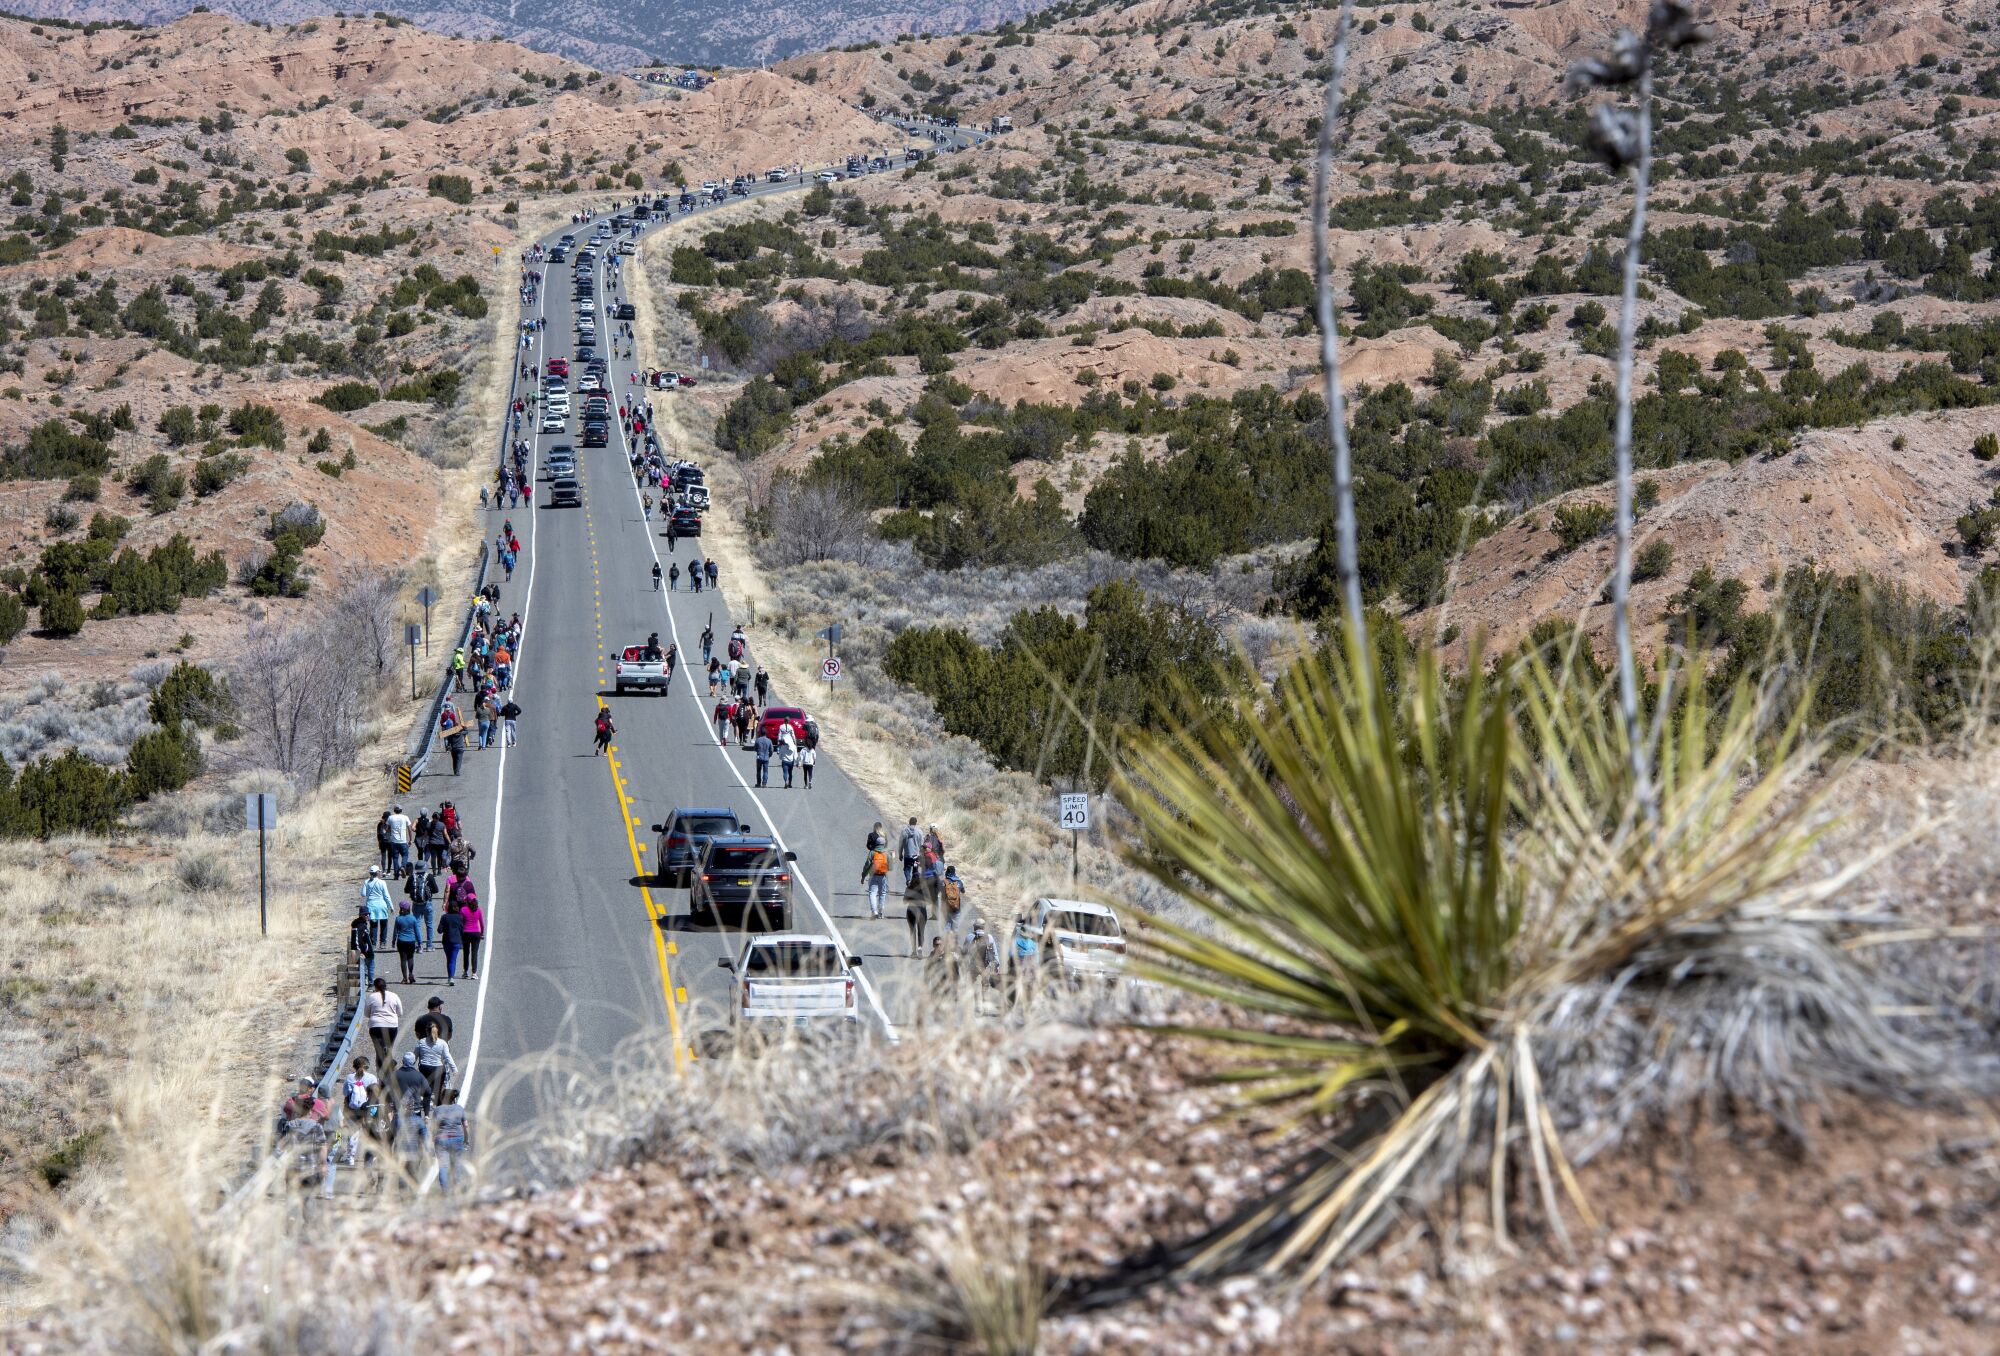 People walk and drive along Santa Fe County Road during a pilgrimage